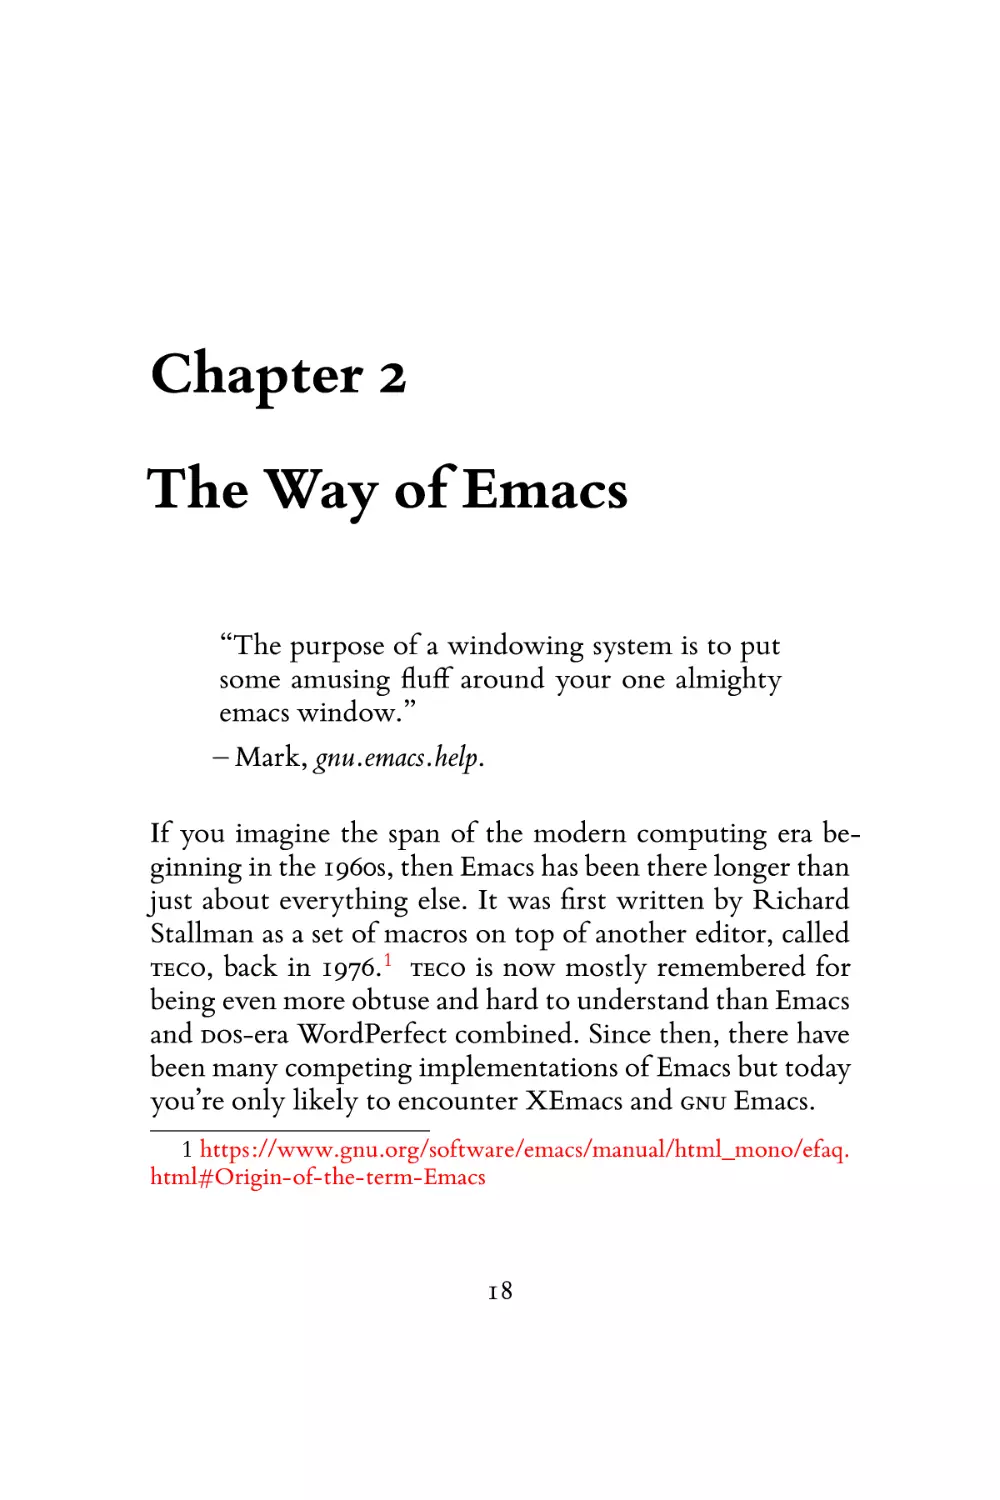 The Way of Emacs